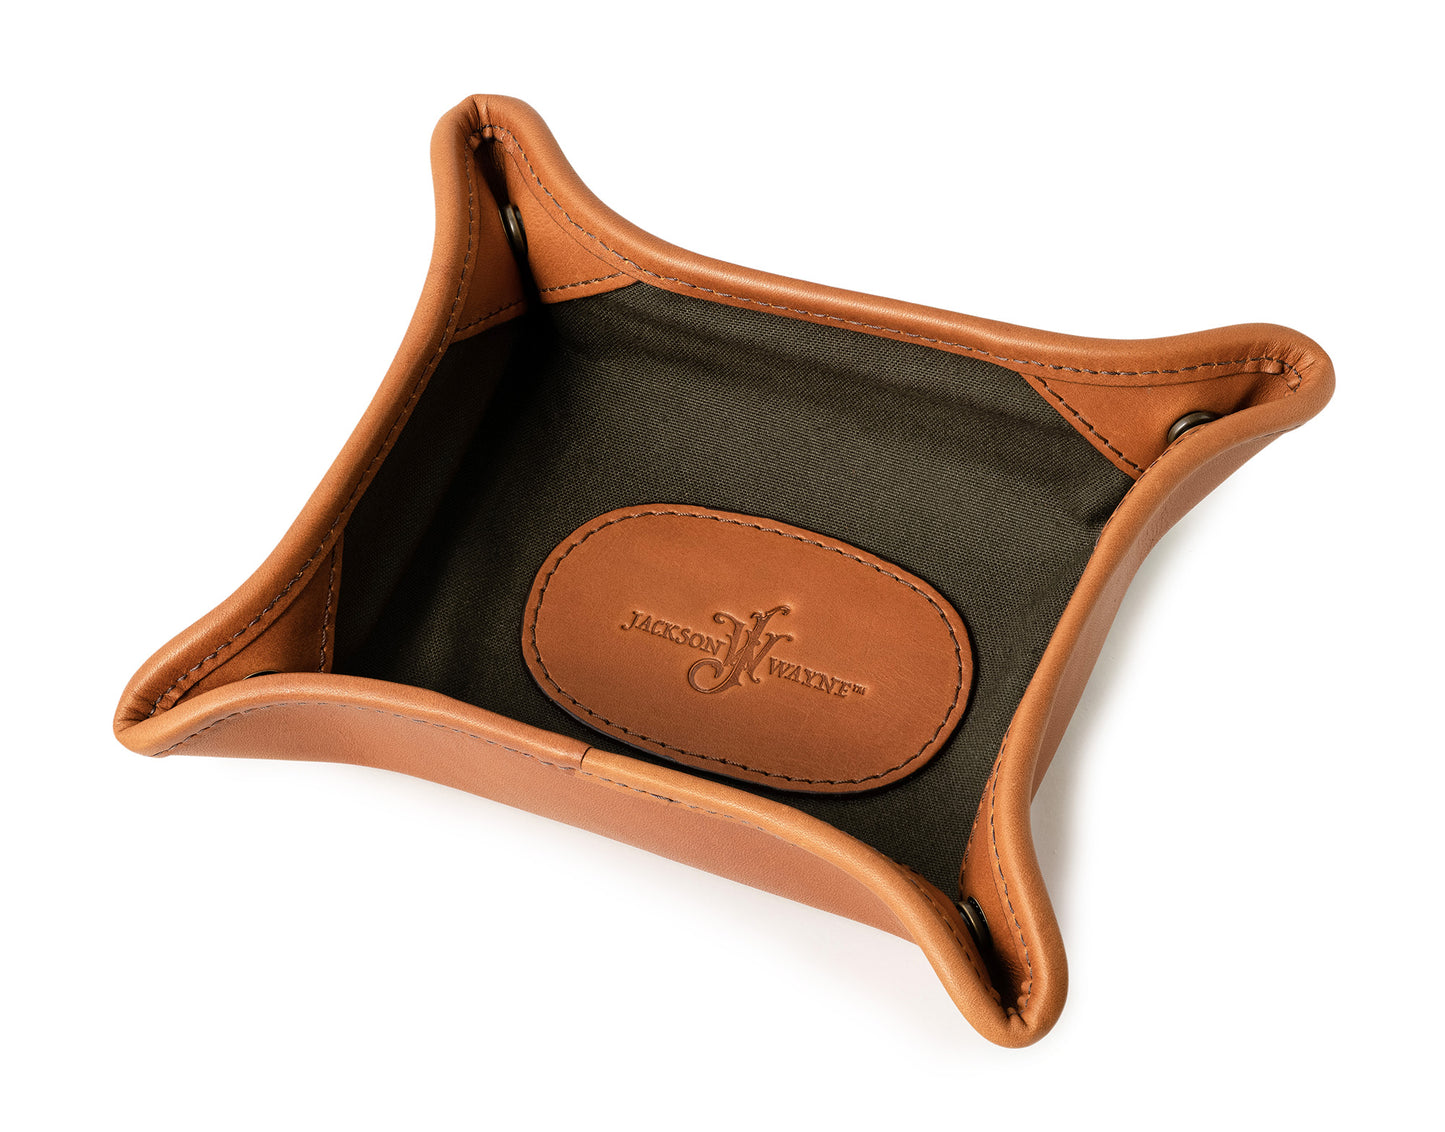 EDC every day carry leather change tray, valet tray and dresser caddy made of full grain leather by Jackson Wayne 